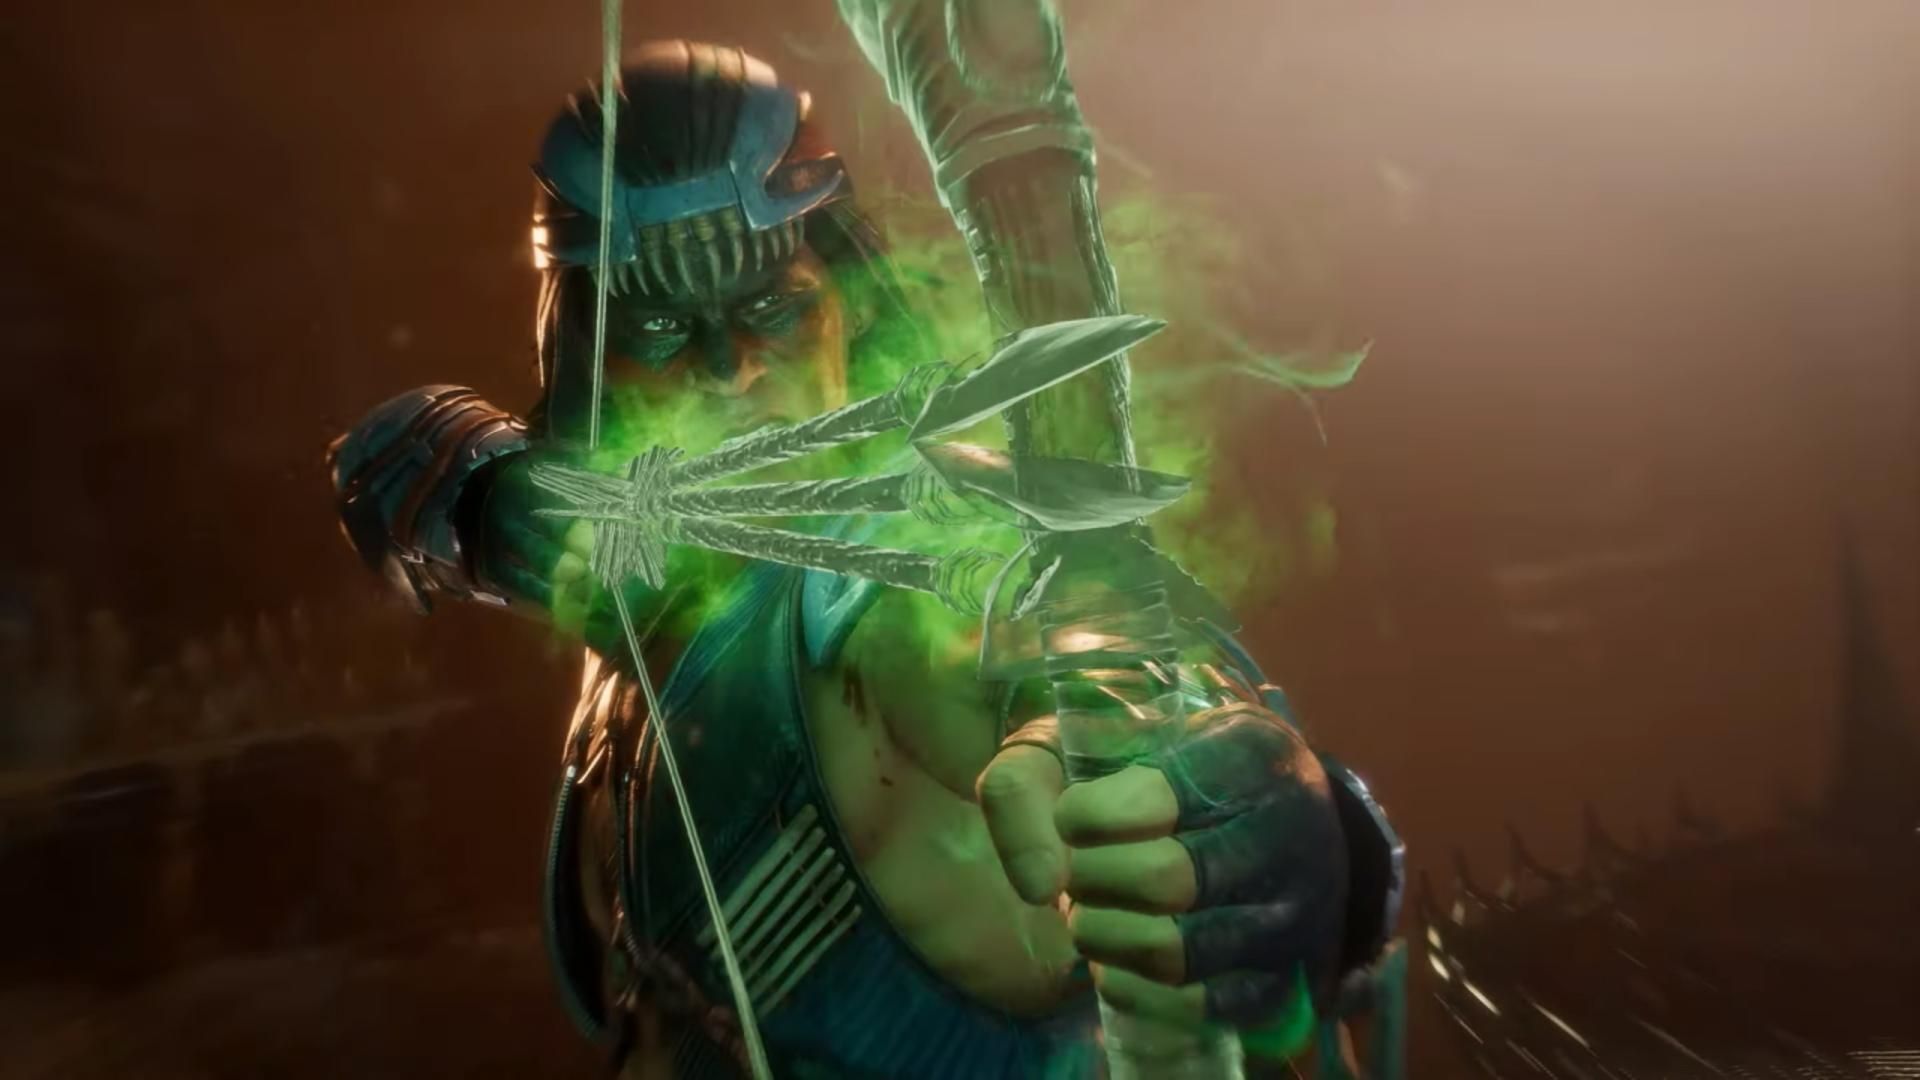 Mortal Kombat Nightwolf Gameplay Trailer And Release Date Revealed